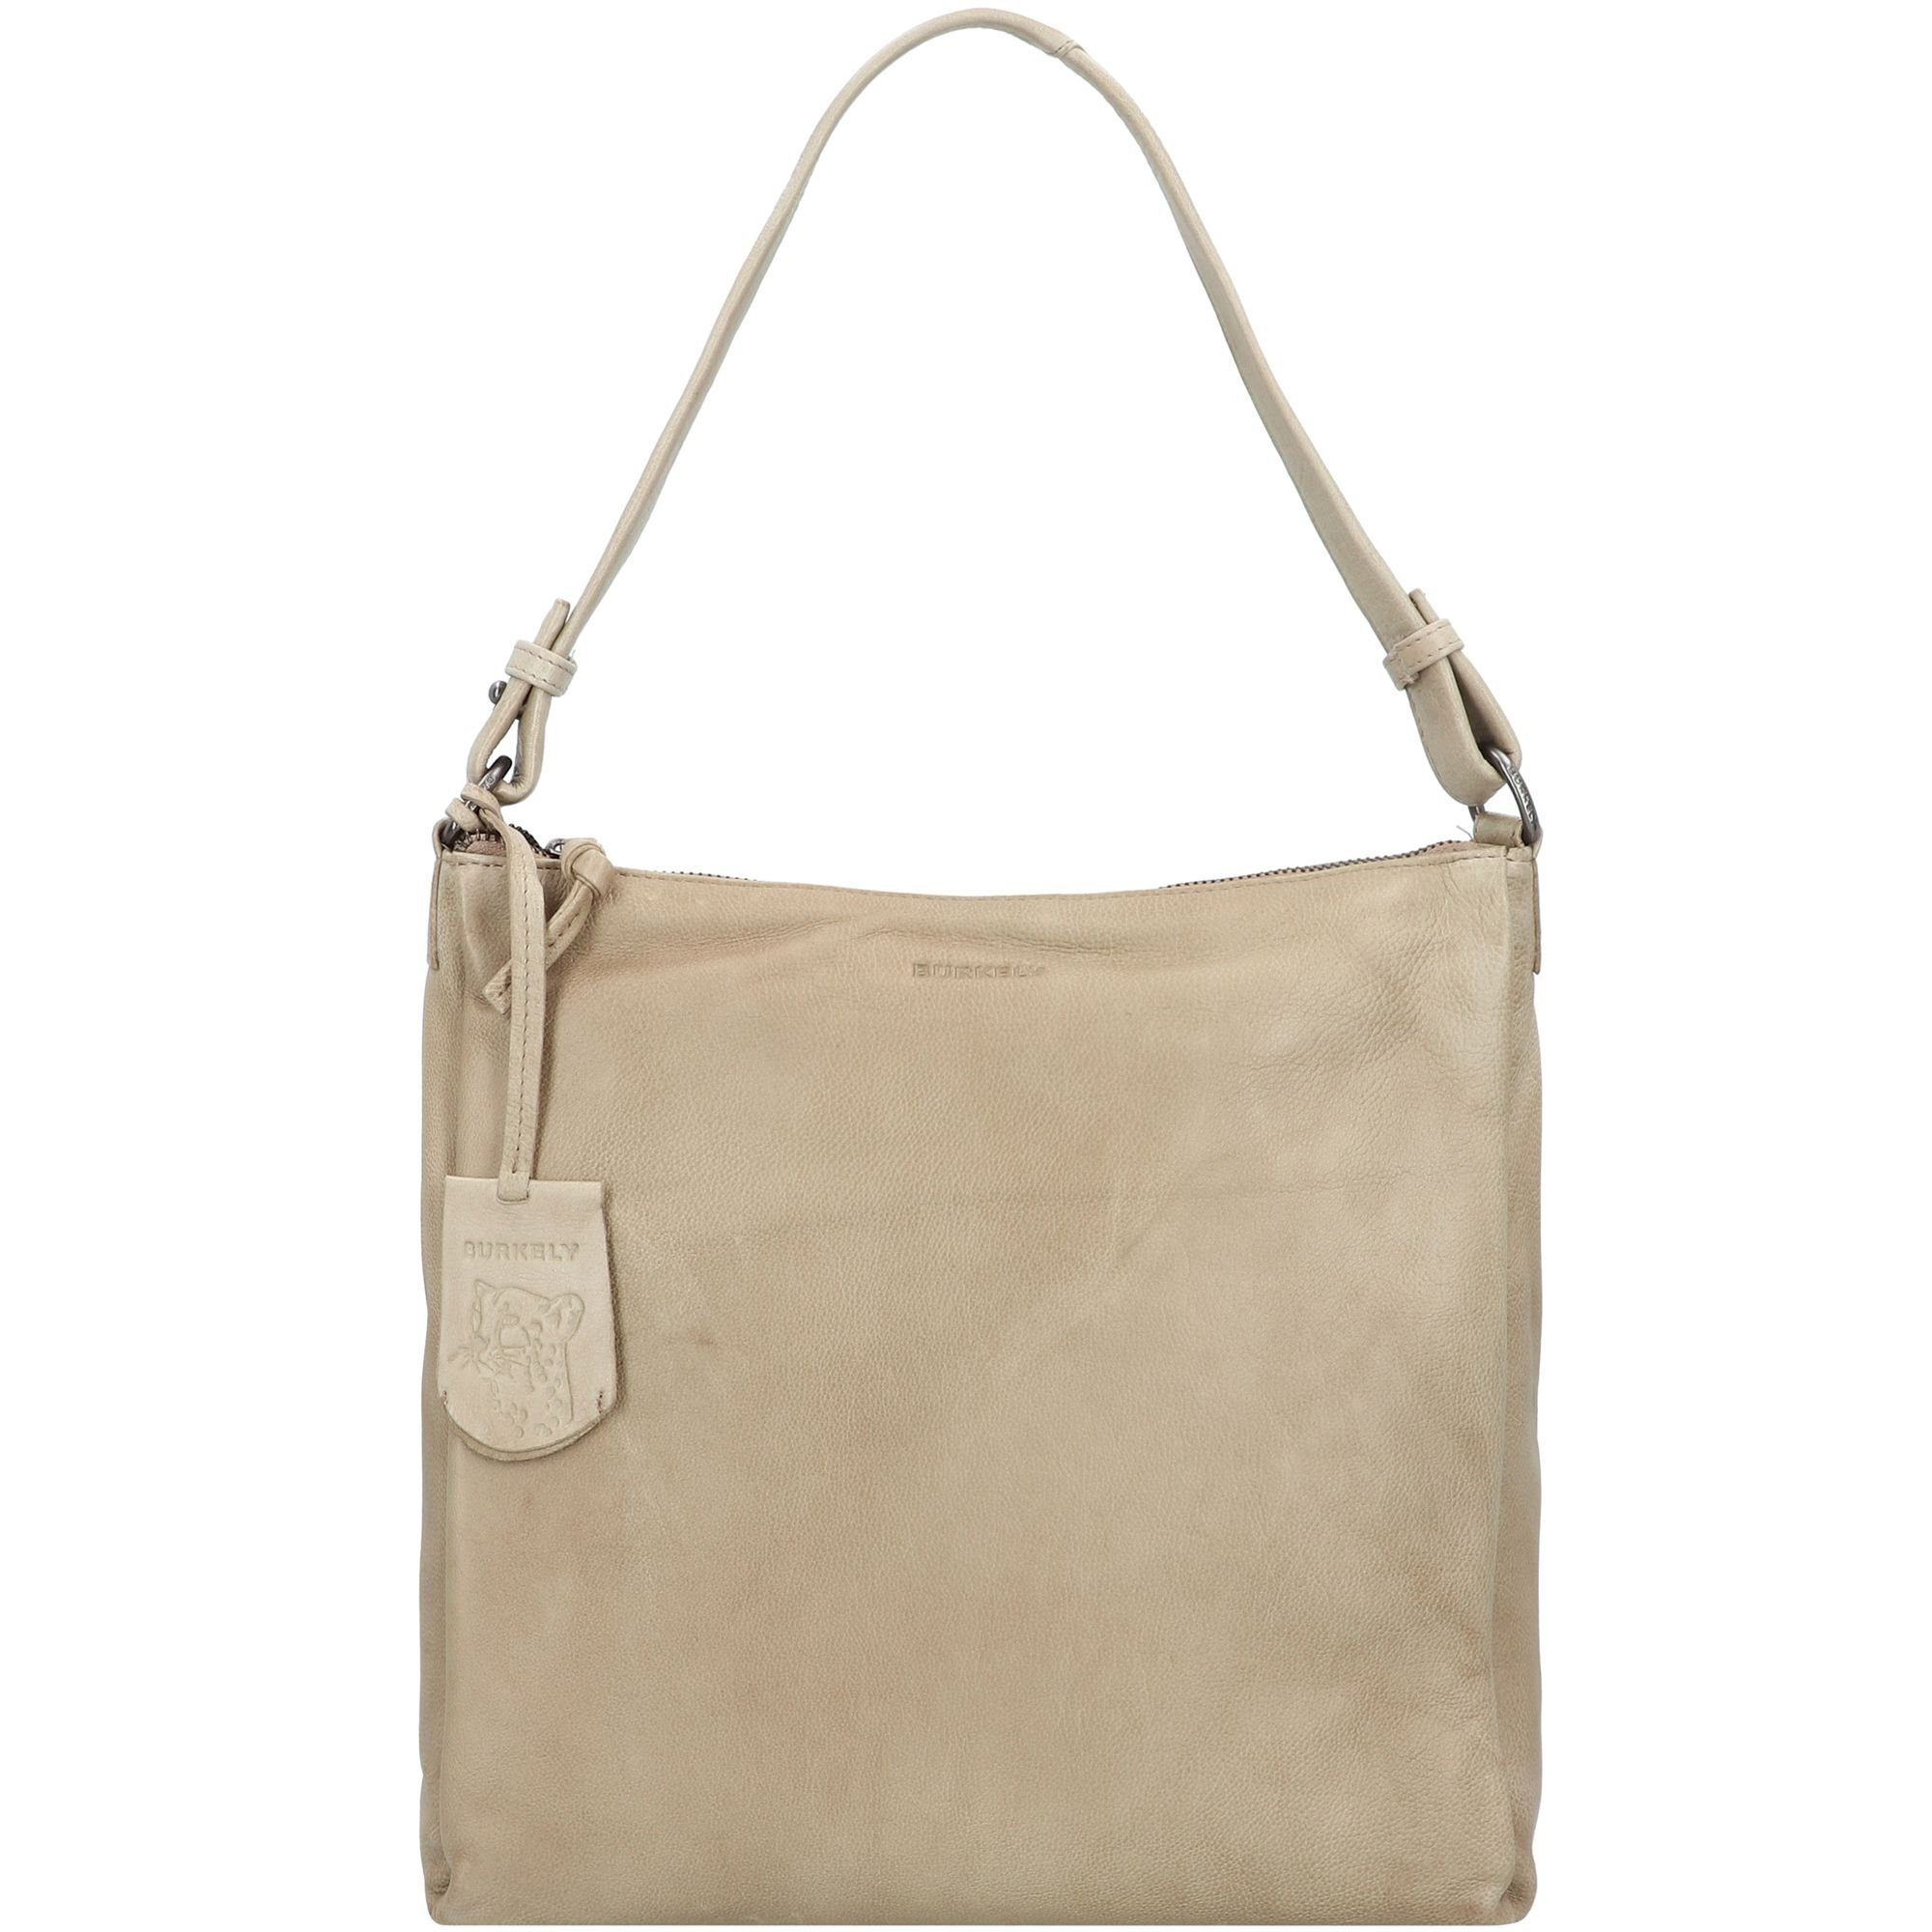 Burkely Schultertasche Just Jolie, Leder truffle taupe